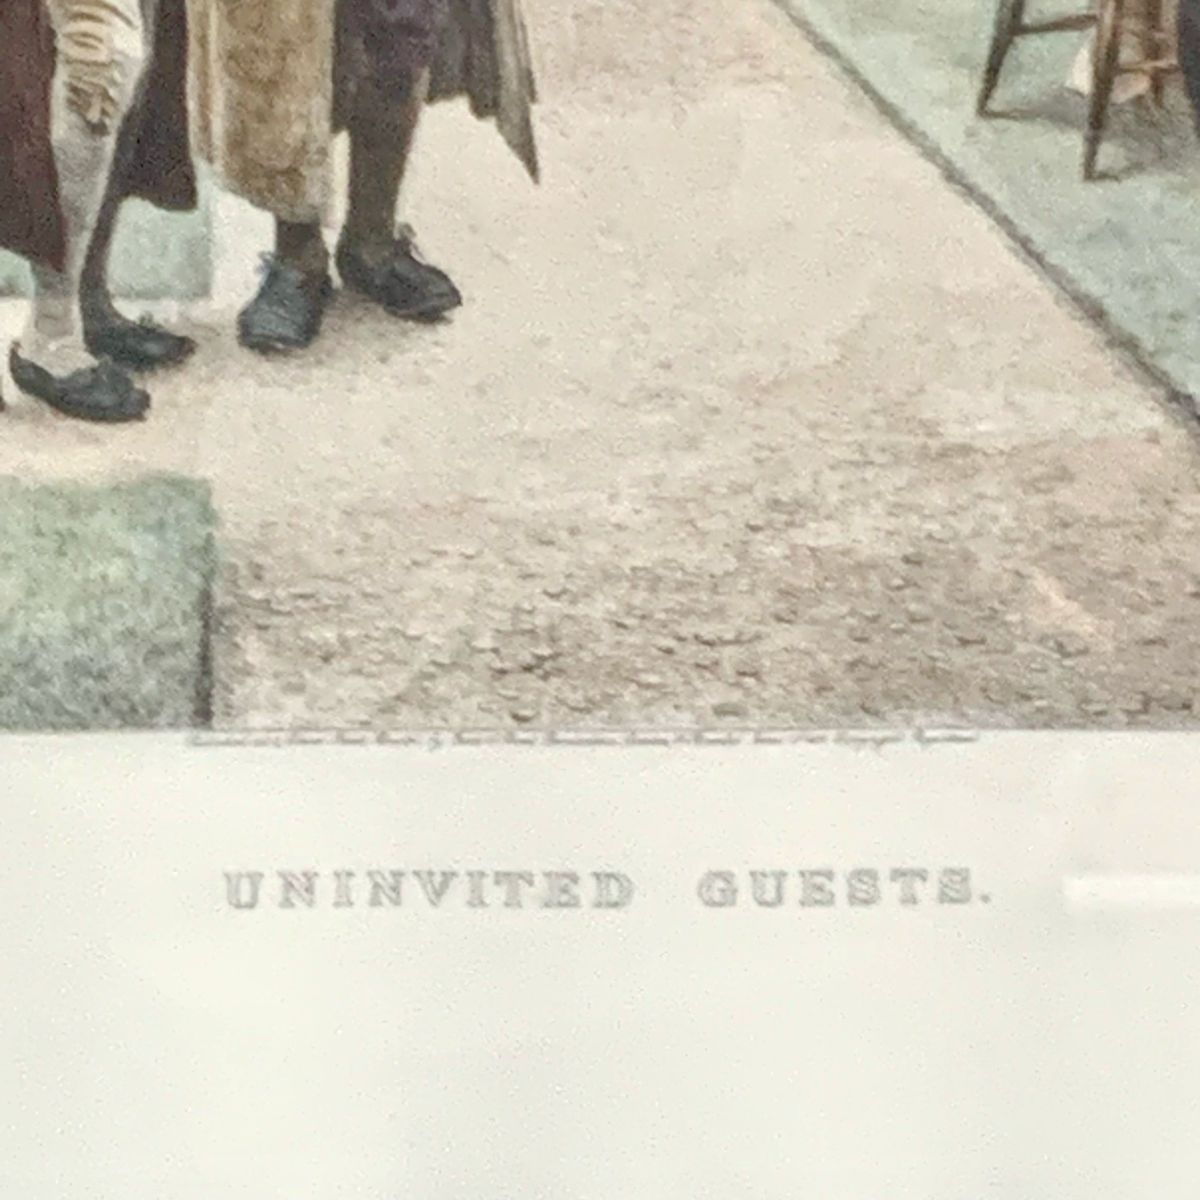 "Uninvited Guests"